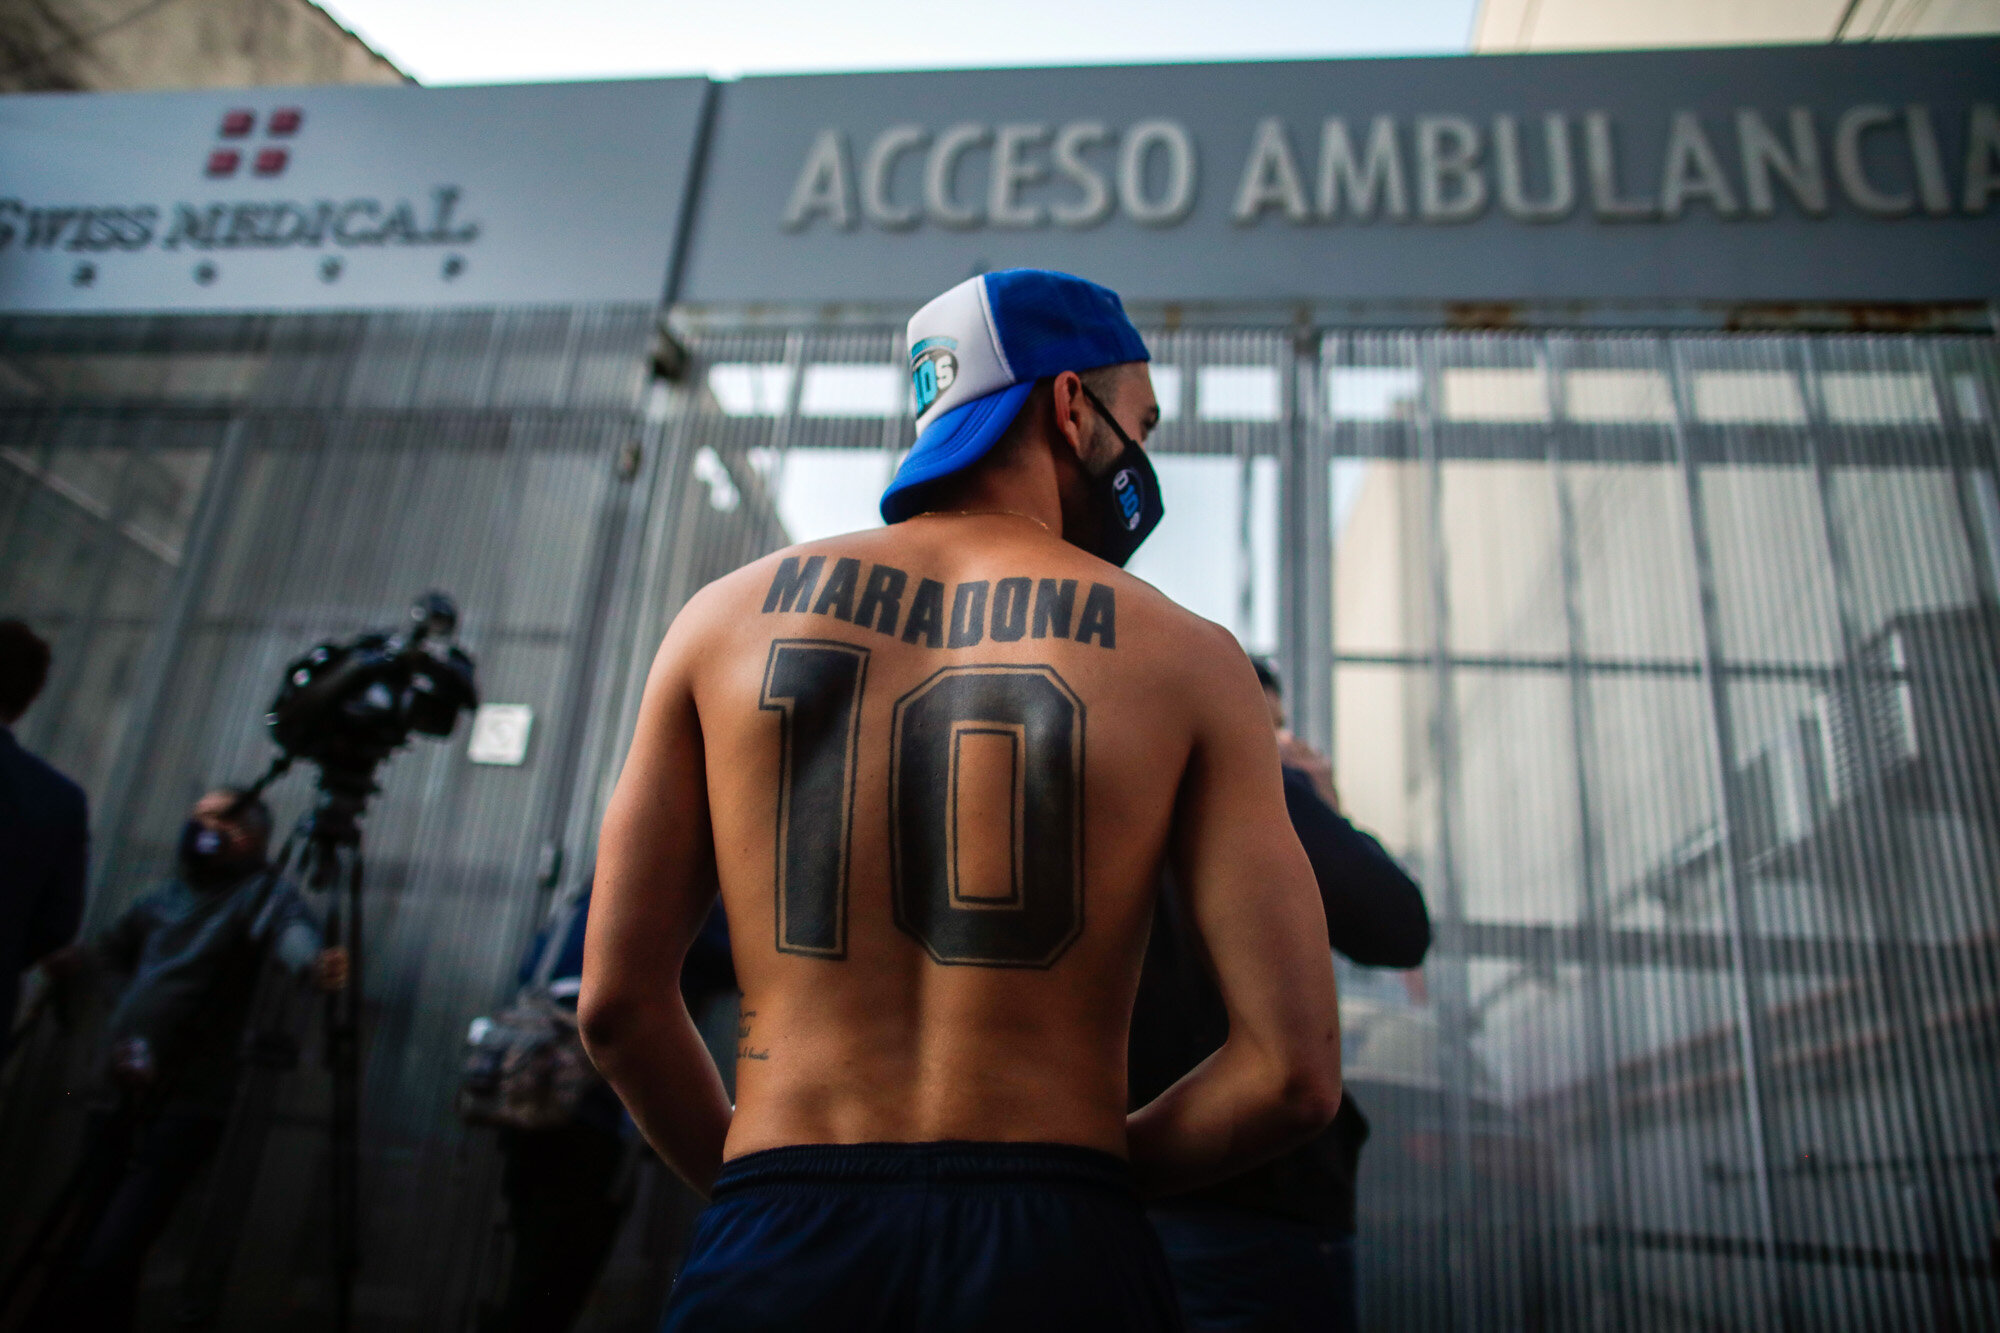  Soccer fans gather outside Clinica Olivos, where former soccer star Diego Maradona will undergo surgery, in Buenos Aires, Argentina, on Nov. 3, 2020. Widely regarded as one of the greatest soccer players of all time, Maradona died on Nov. 25. He was